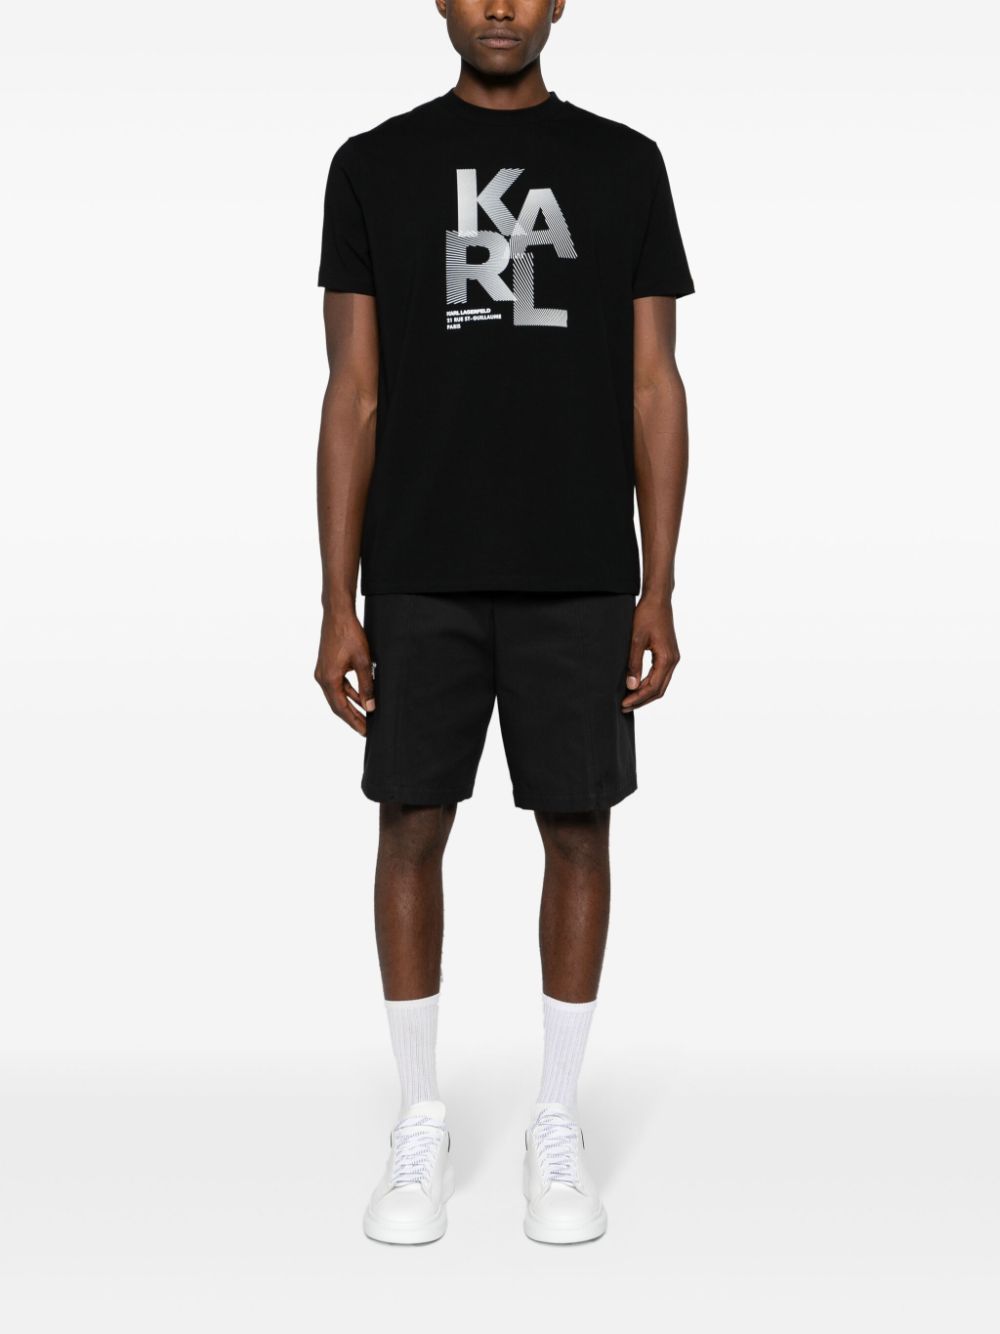 Karl Lagerfeld KARL LAGERFELD- Iconic T-shirt With Lettering